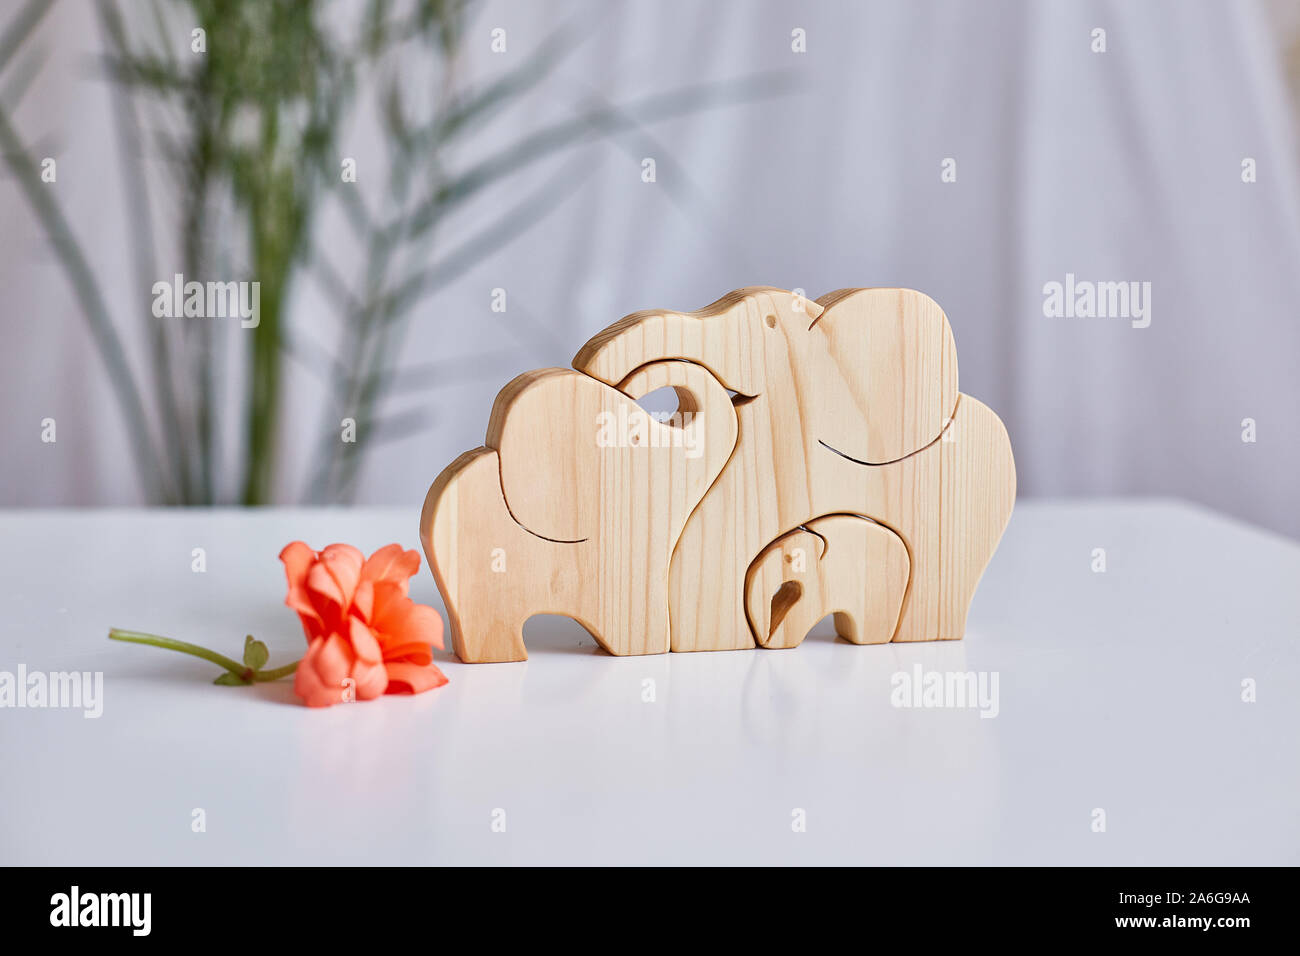 A family of elephants is carved from a light pine tree. traditional toys, a symbol of a happy family. shallow depth of field. Focus on elephants. Hori Stock Photo